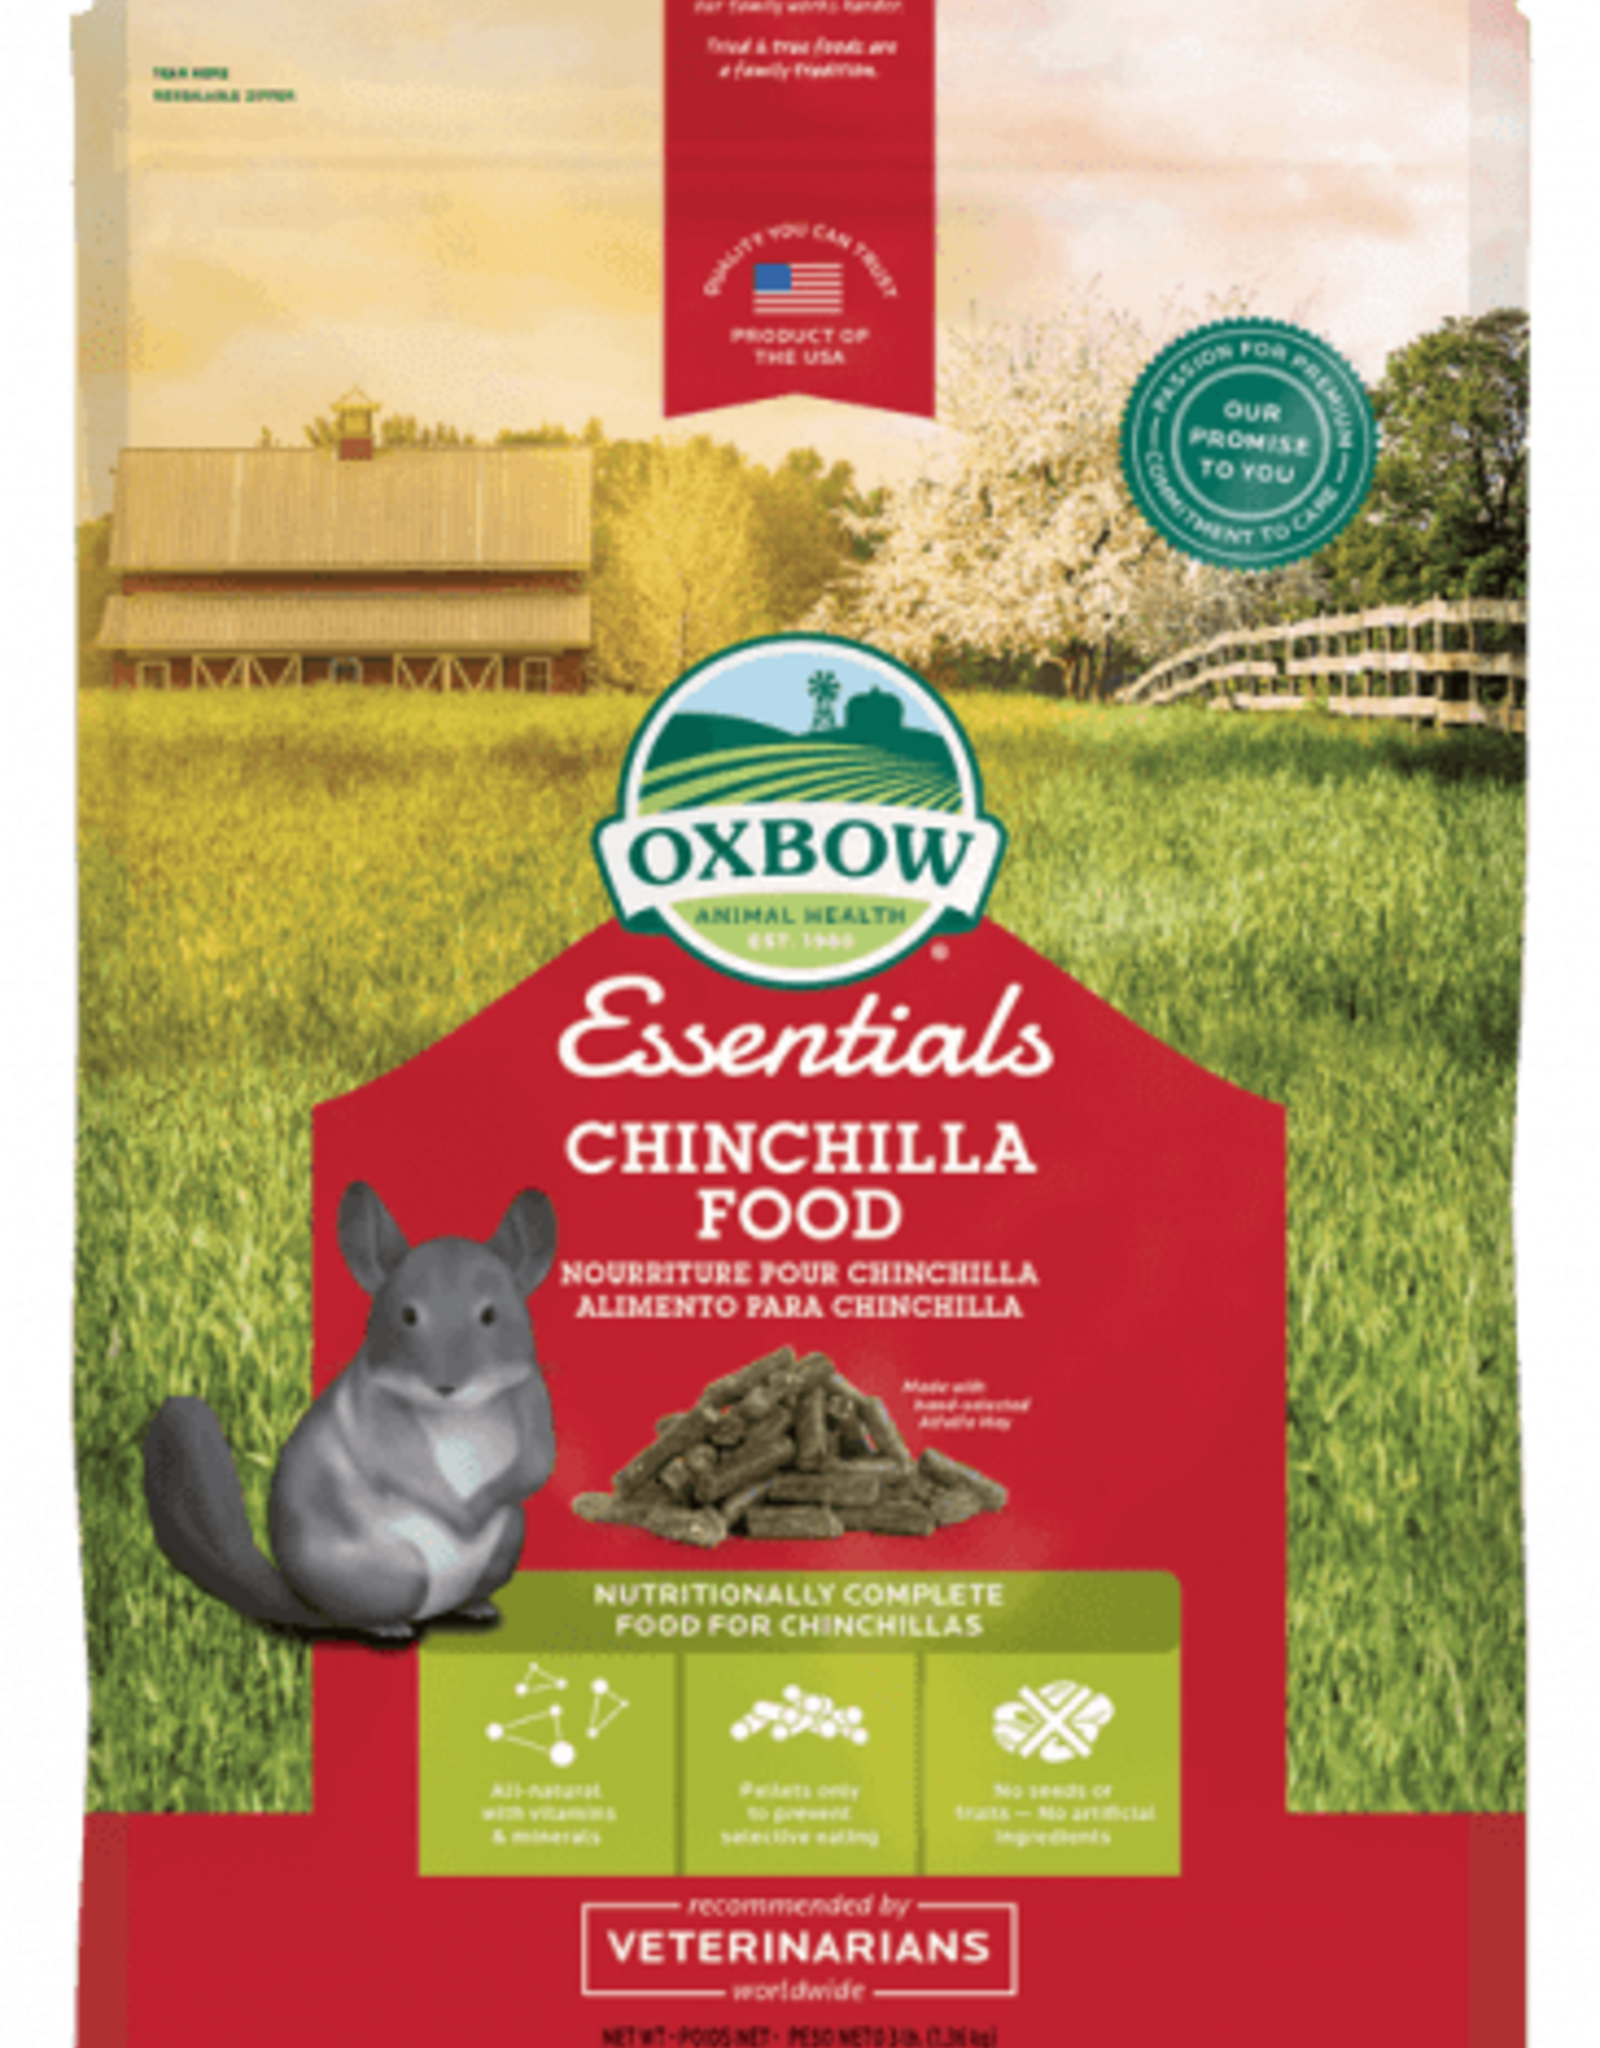 OXBOW PET PRODUCTS OXBOW CHINCHILLA FOOD 3LBS